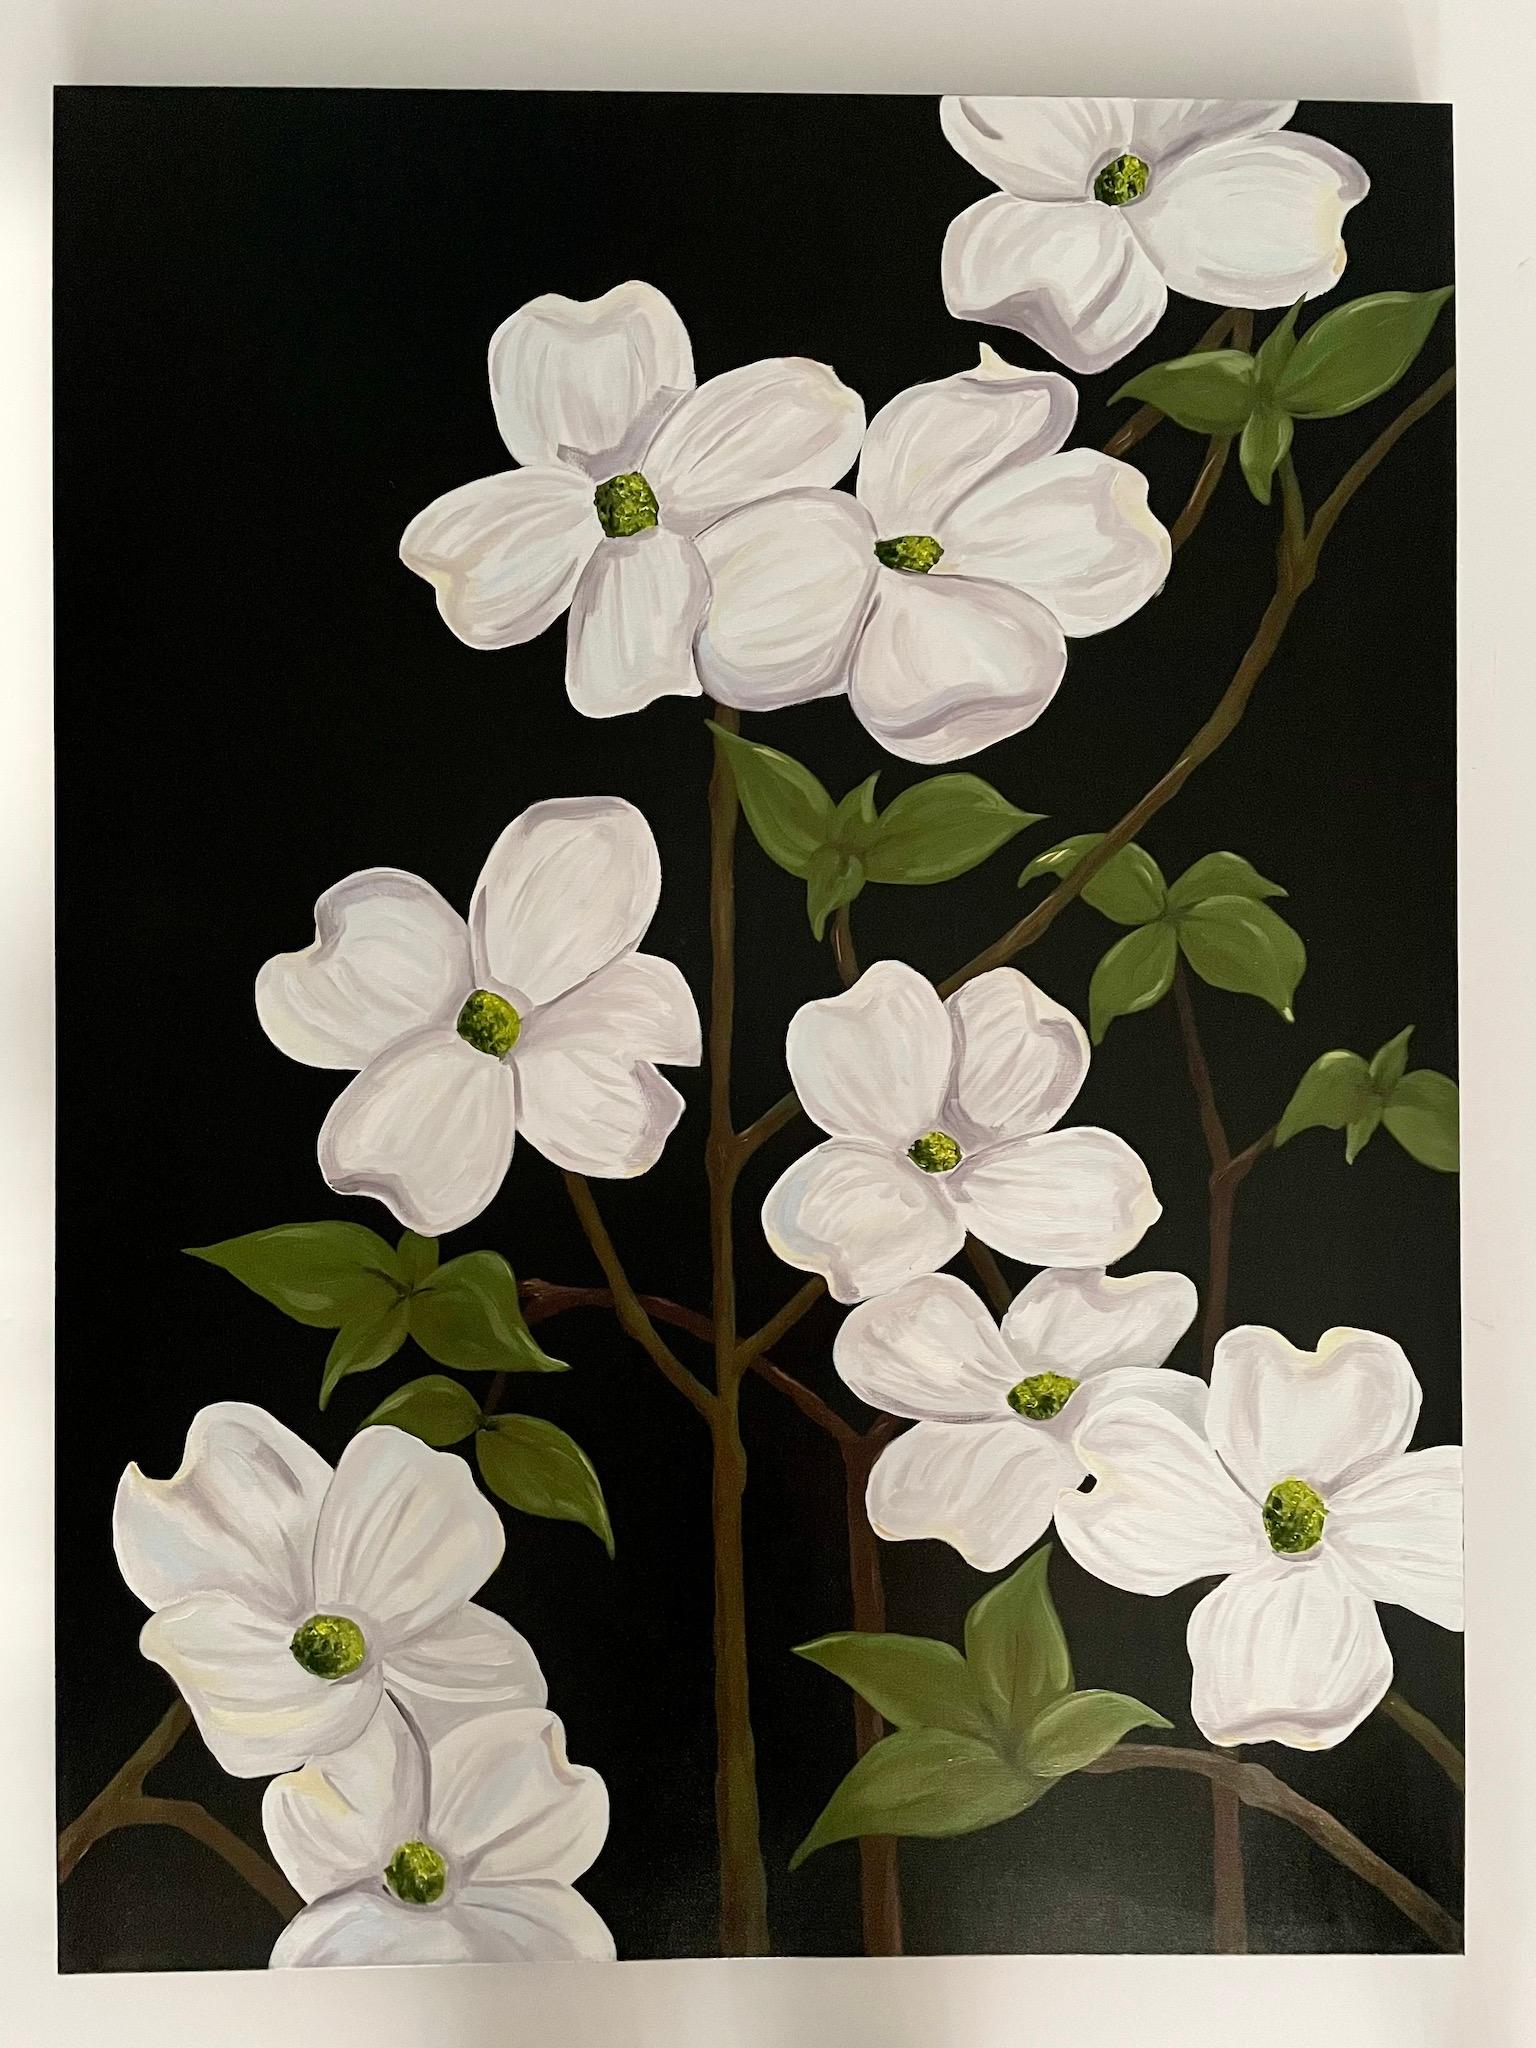 Jubilant White Flowers with Verdant Leaves on Branches. Title - Wild Dogwood - Painting by Ken Miller